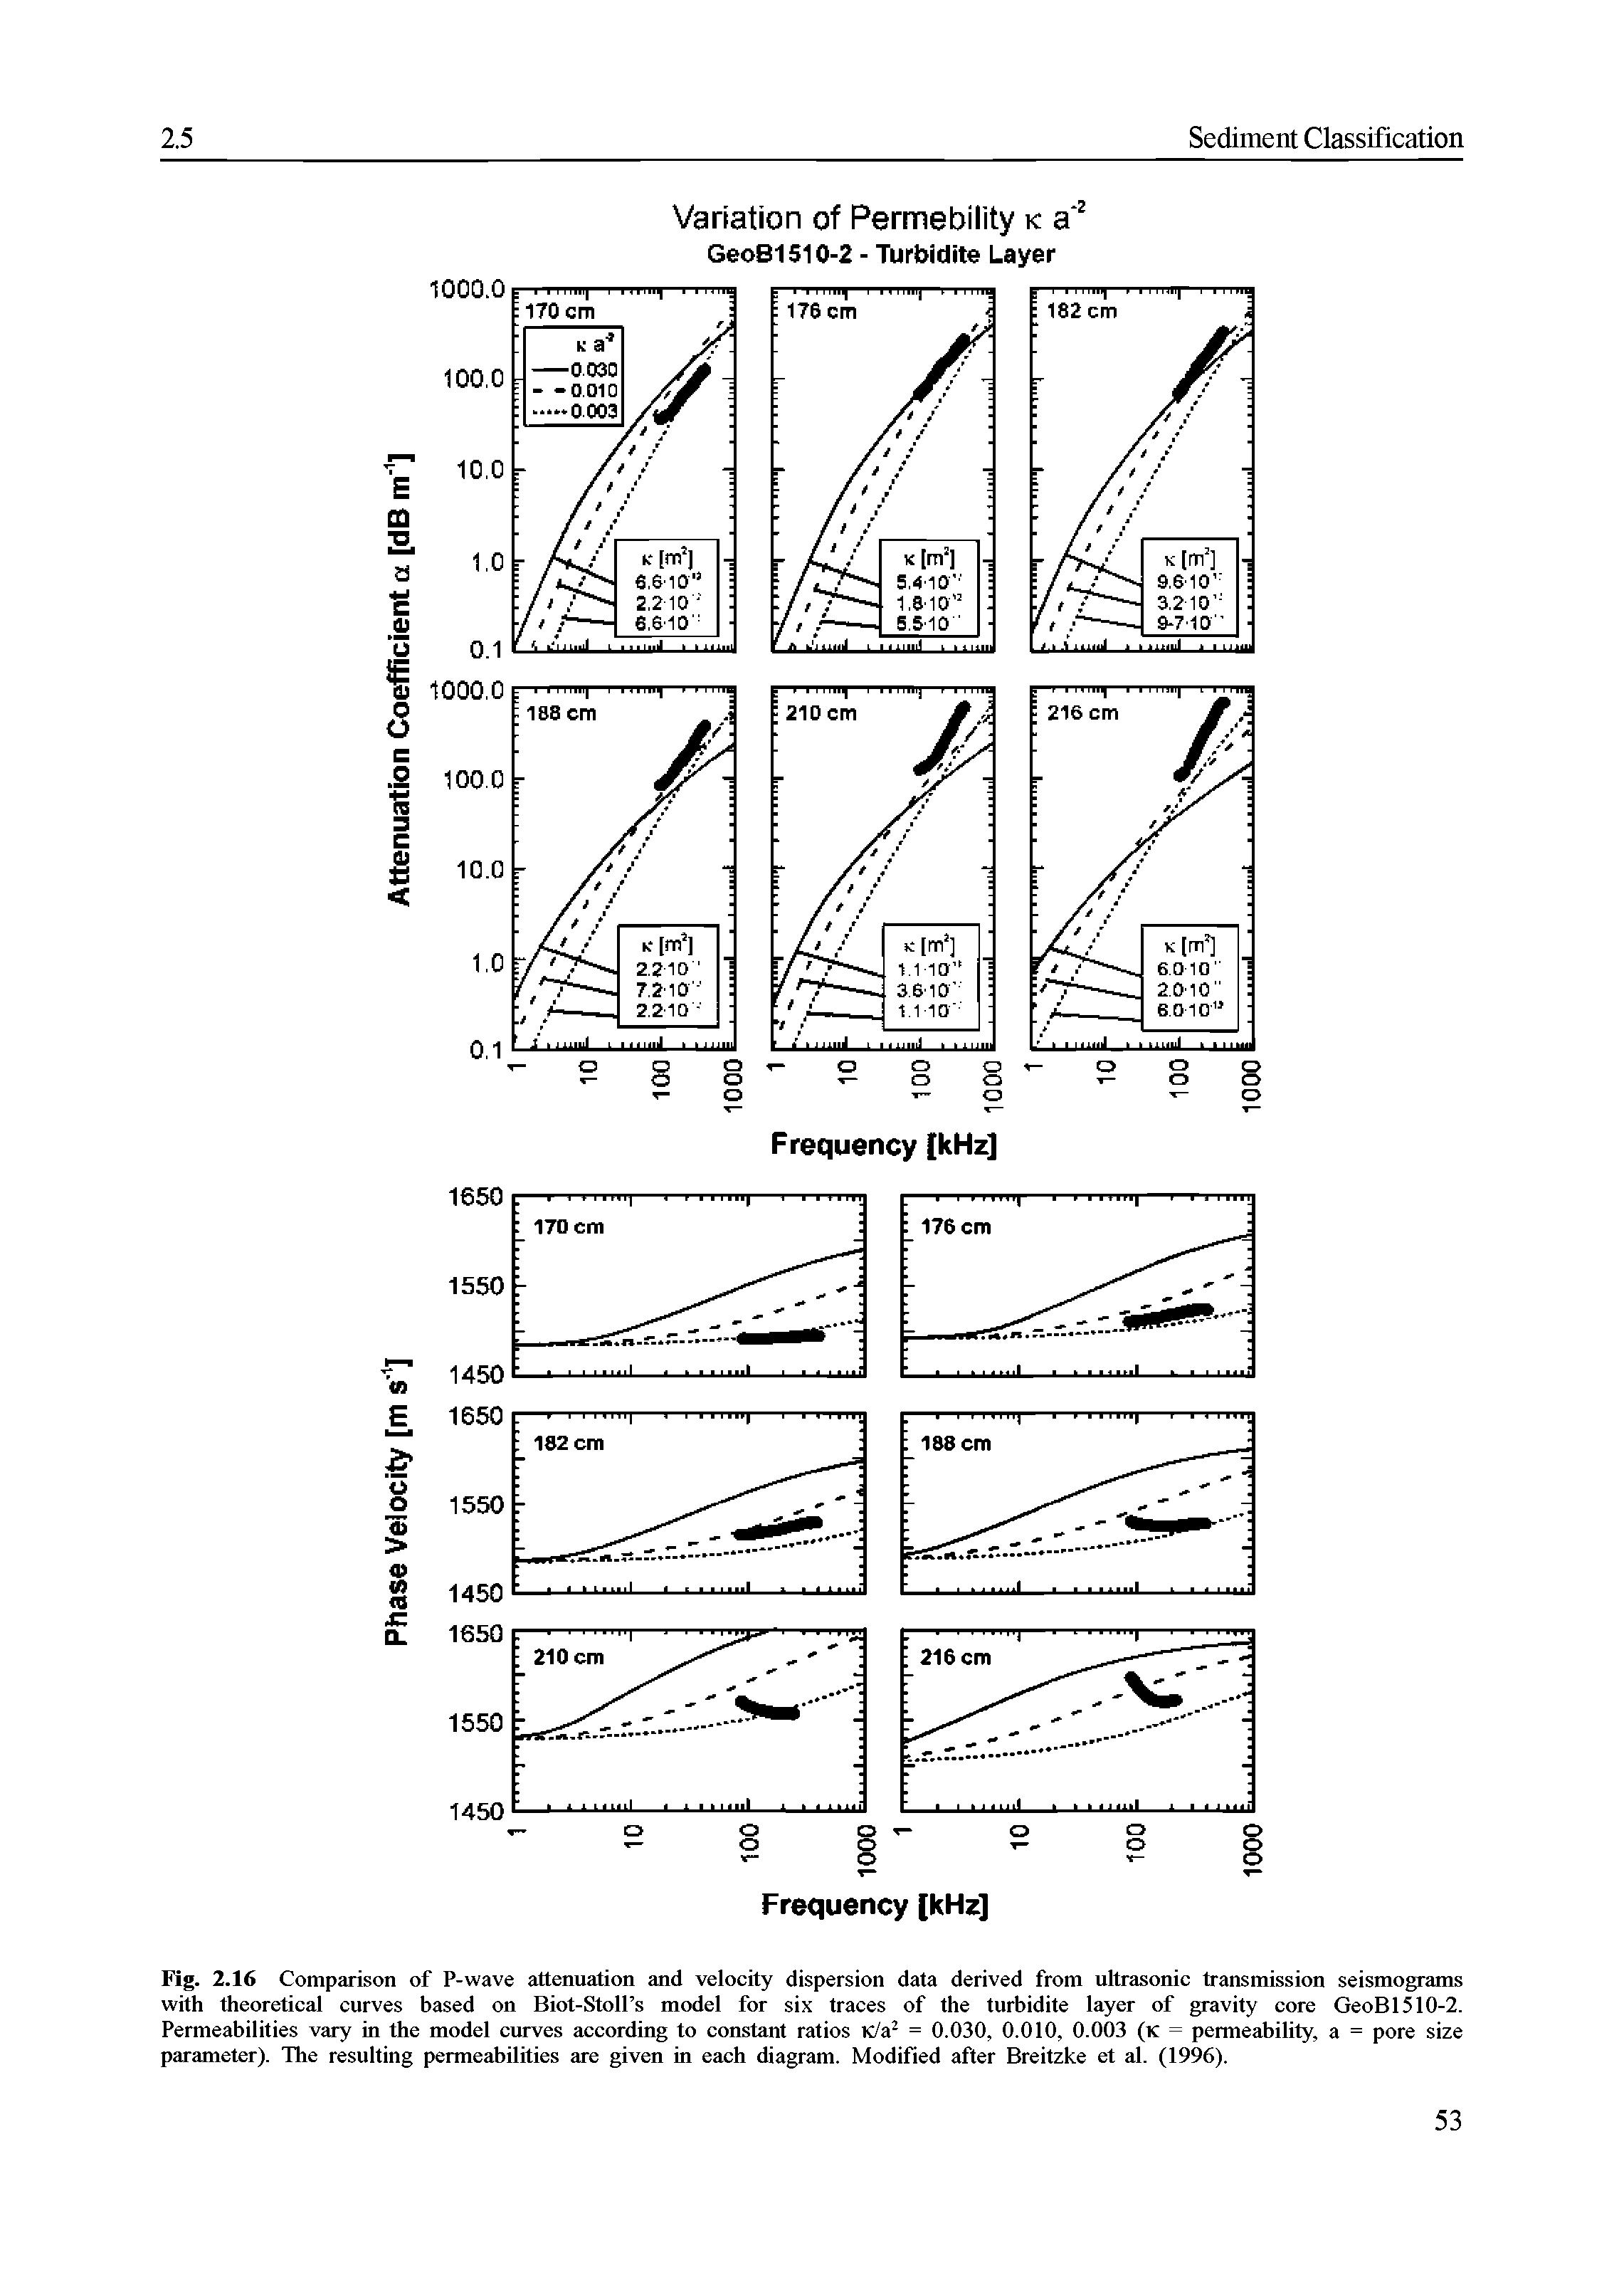 Fig. 2.16 Comparison of P-wave attenuation and velocity dispersion data derived from ultrasonic transmission seismograms with theoretical curves based on Biot-Stoll s model for six traces of the turbidite layer of gravity core GeoB1510-2. Permeabilities vary in the model curves according to constant ratios K/a = 0.030, 0.010, 0.003 (K = permeability, a = pore size parameter). The resulting permeabilities are given in each diagram. Modified after Breitzke et al. (1996).